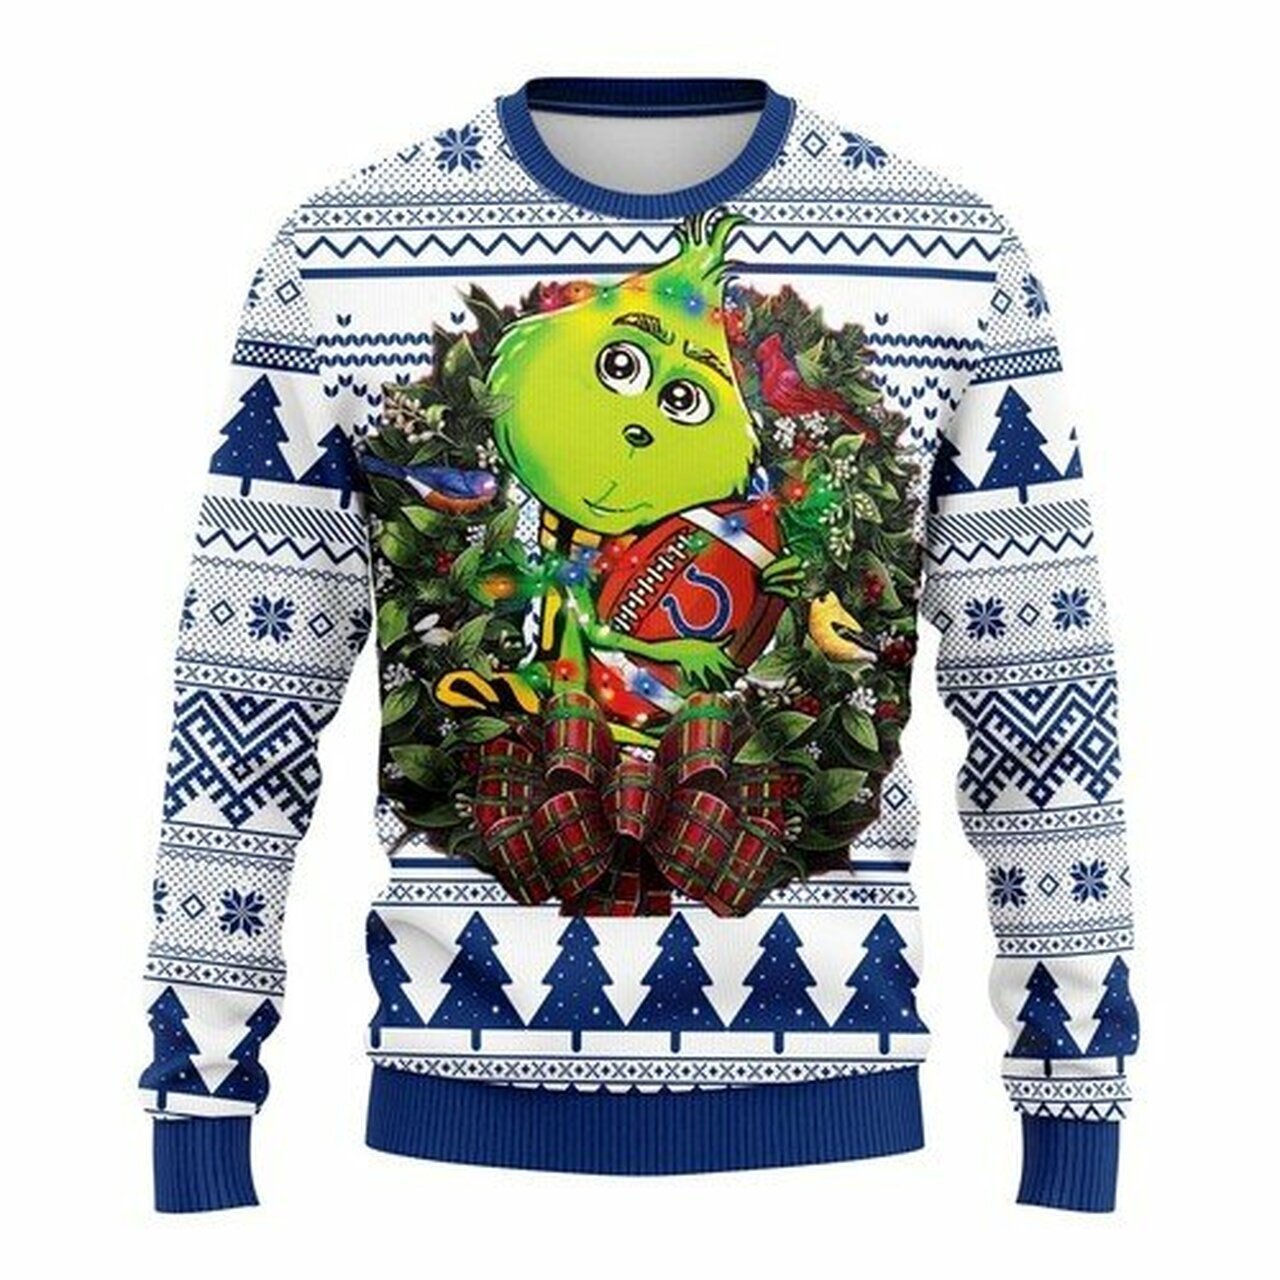 [ HOT ] NFL Indianapolis Colts Grinch hug ugly christmas sweater – Saleoff 030122